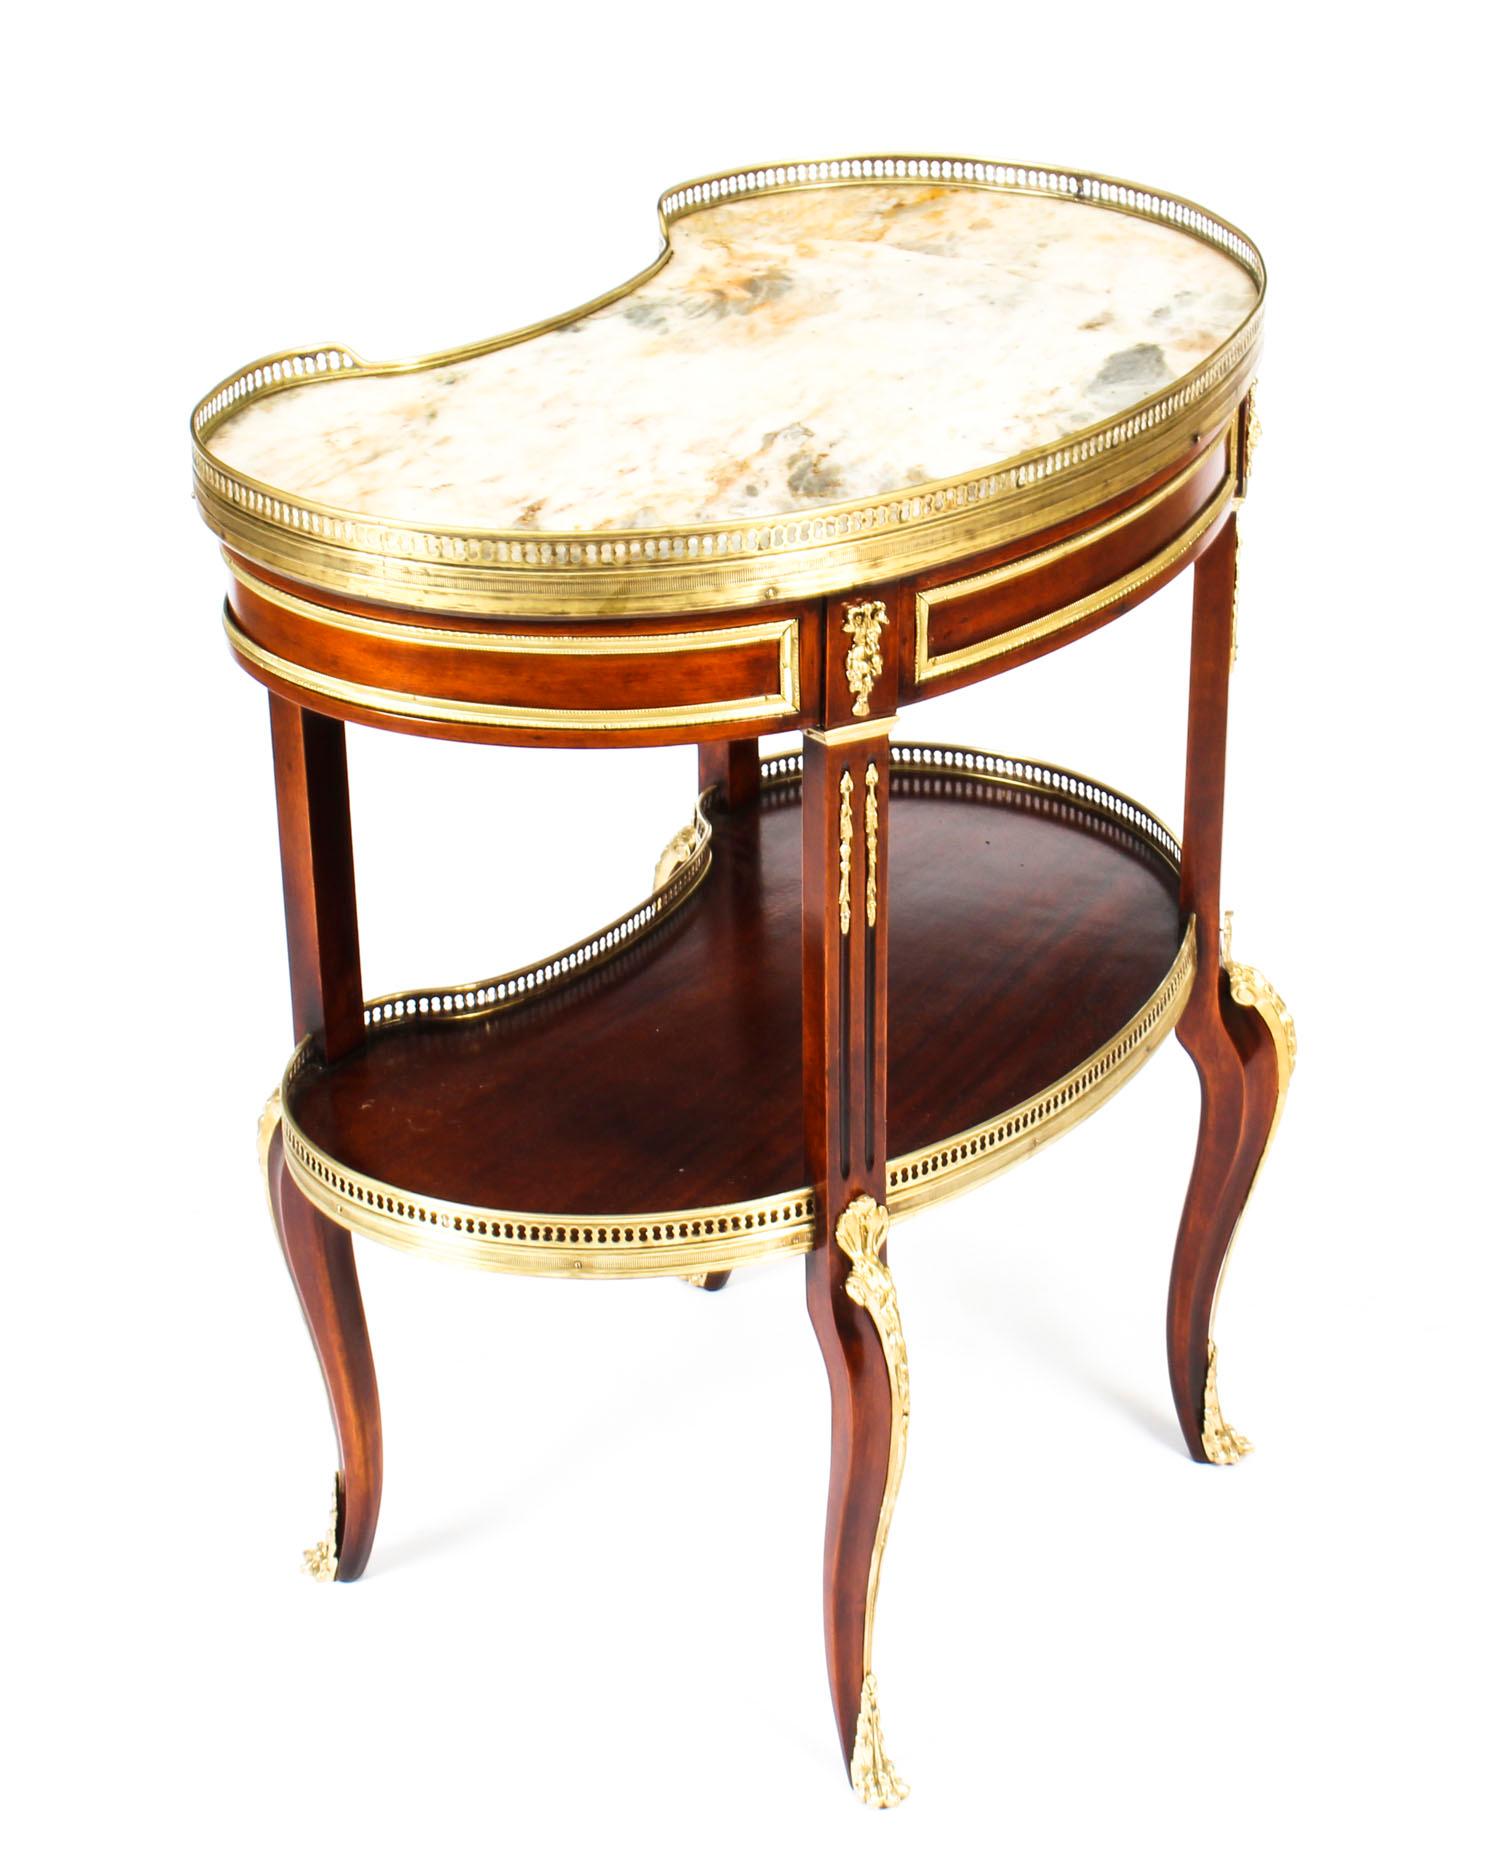 This is a very fine antique French Louis XVI revival mahogany, marble and ormolu kidney-shaped side table, circa 1860 in date.
 
This delightful side table has been masterfully crafted from beautiful mahogany and features a decorative ormolu